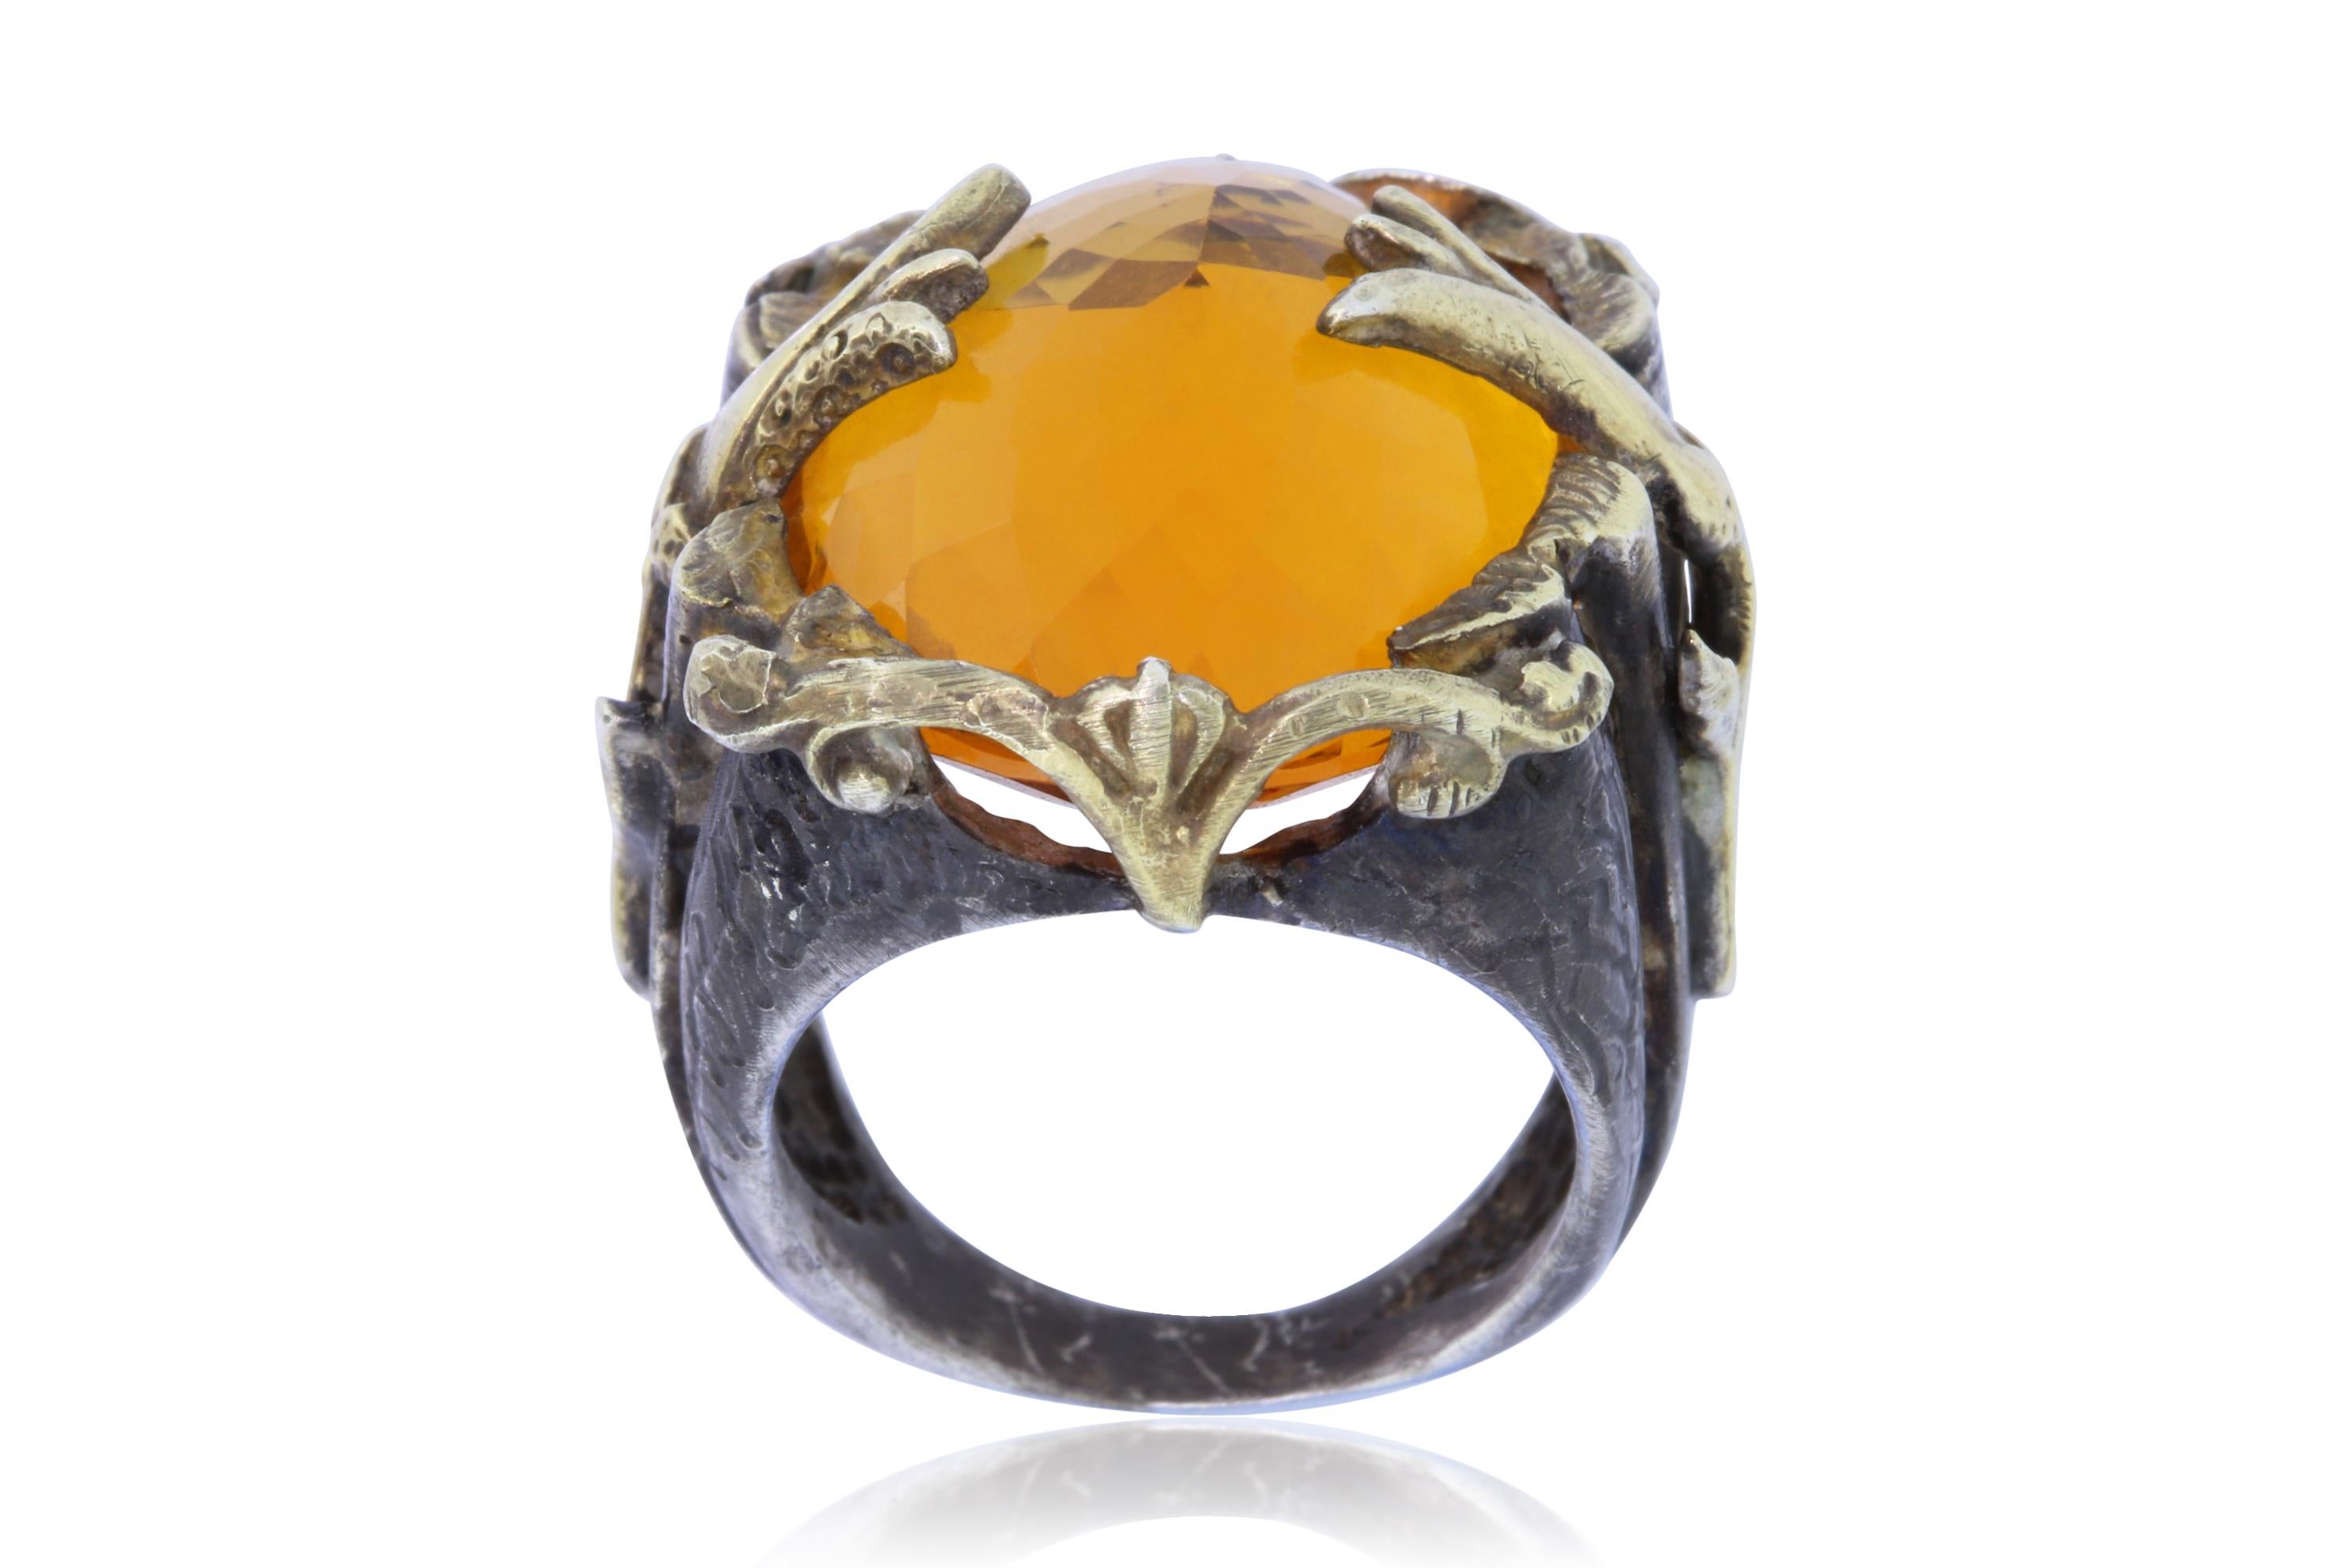 From our Game of Thrones Collection, this stunning piece features an Oval Citrine center set in a intricate one of a kind design; A piece that is fit for a Queen!

Material: Silver
Gemstones: 1 Oval Citrine
Ring Size: 6.75 (can be sized)

Fine